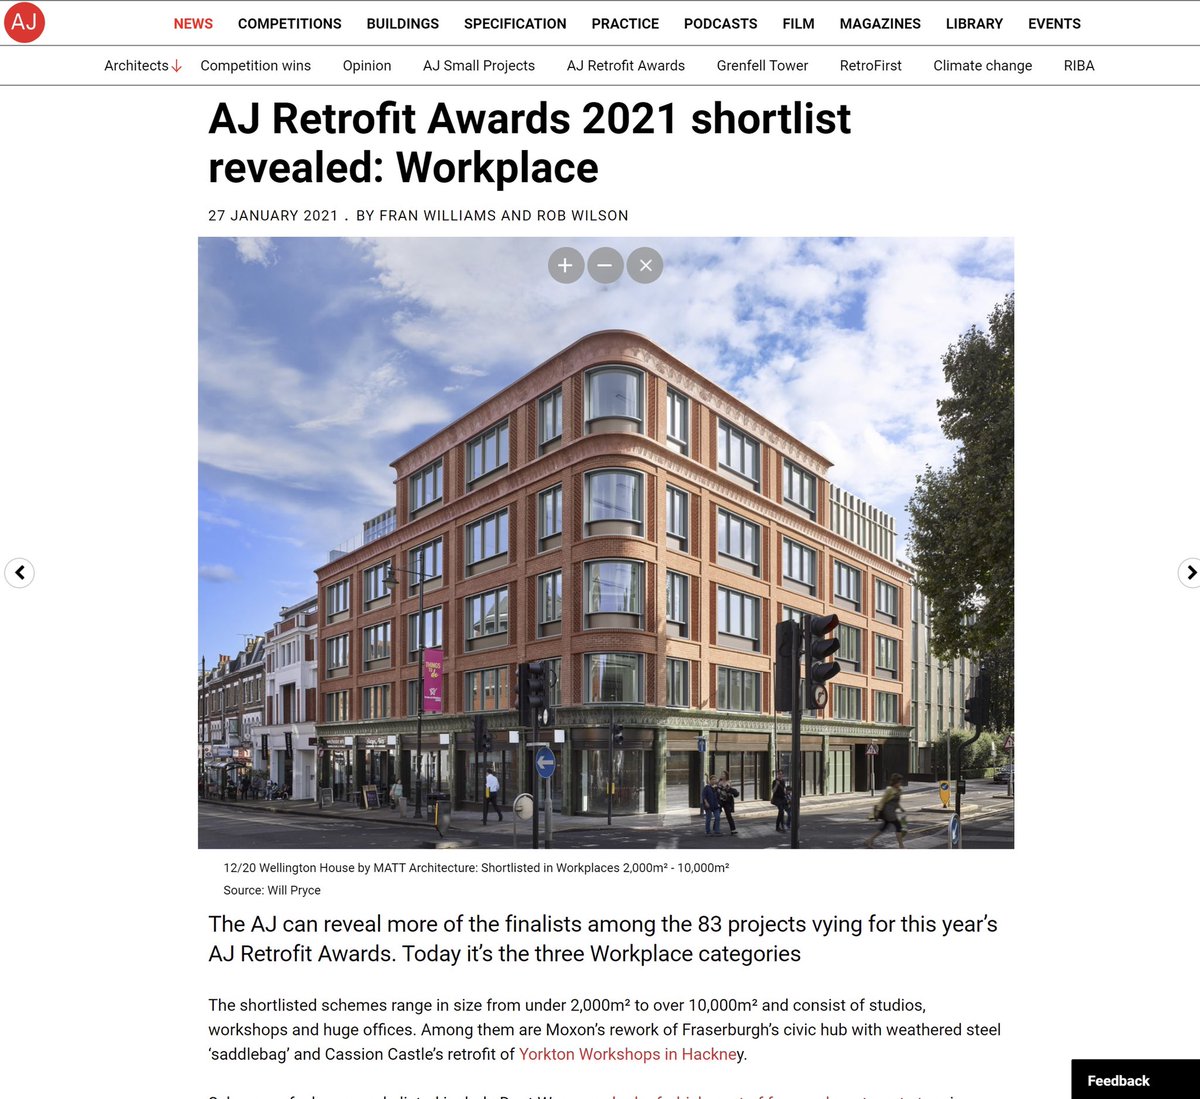 Better get this on Twitter now - we can celebrate being shortlisted even if we don’t win. Yay! Really pleased to see the AJ Retrofit awards raising the profile of the re-use of buildings - great Circular Economy thing to do where possible. #Retrofitawards #circulareconomy